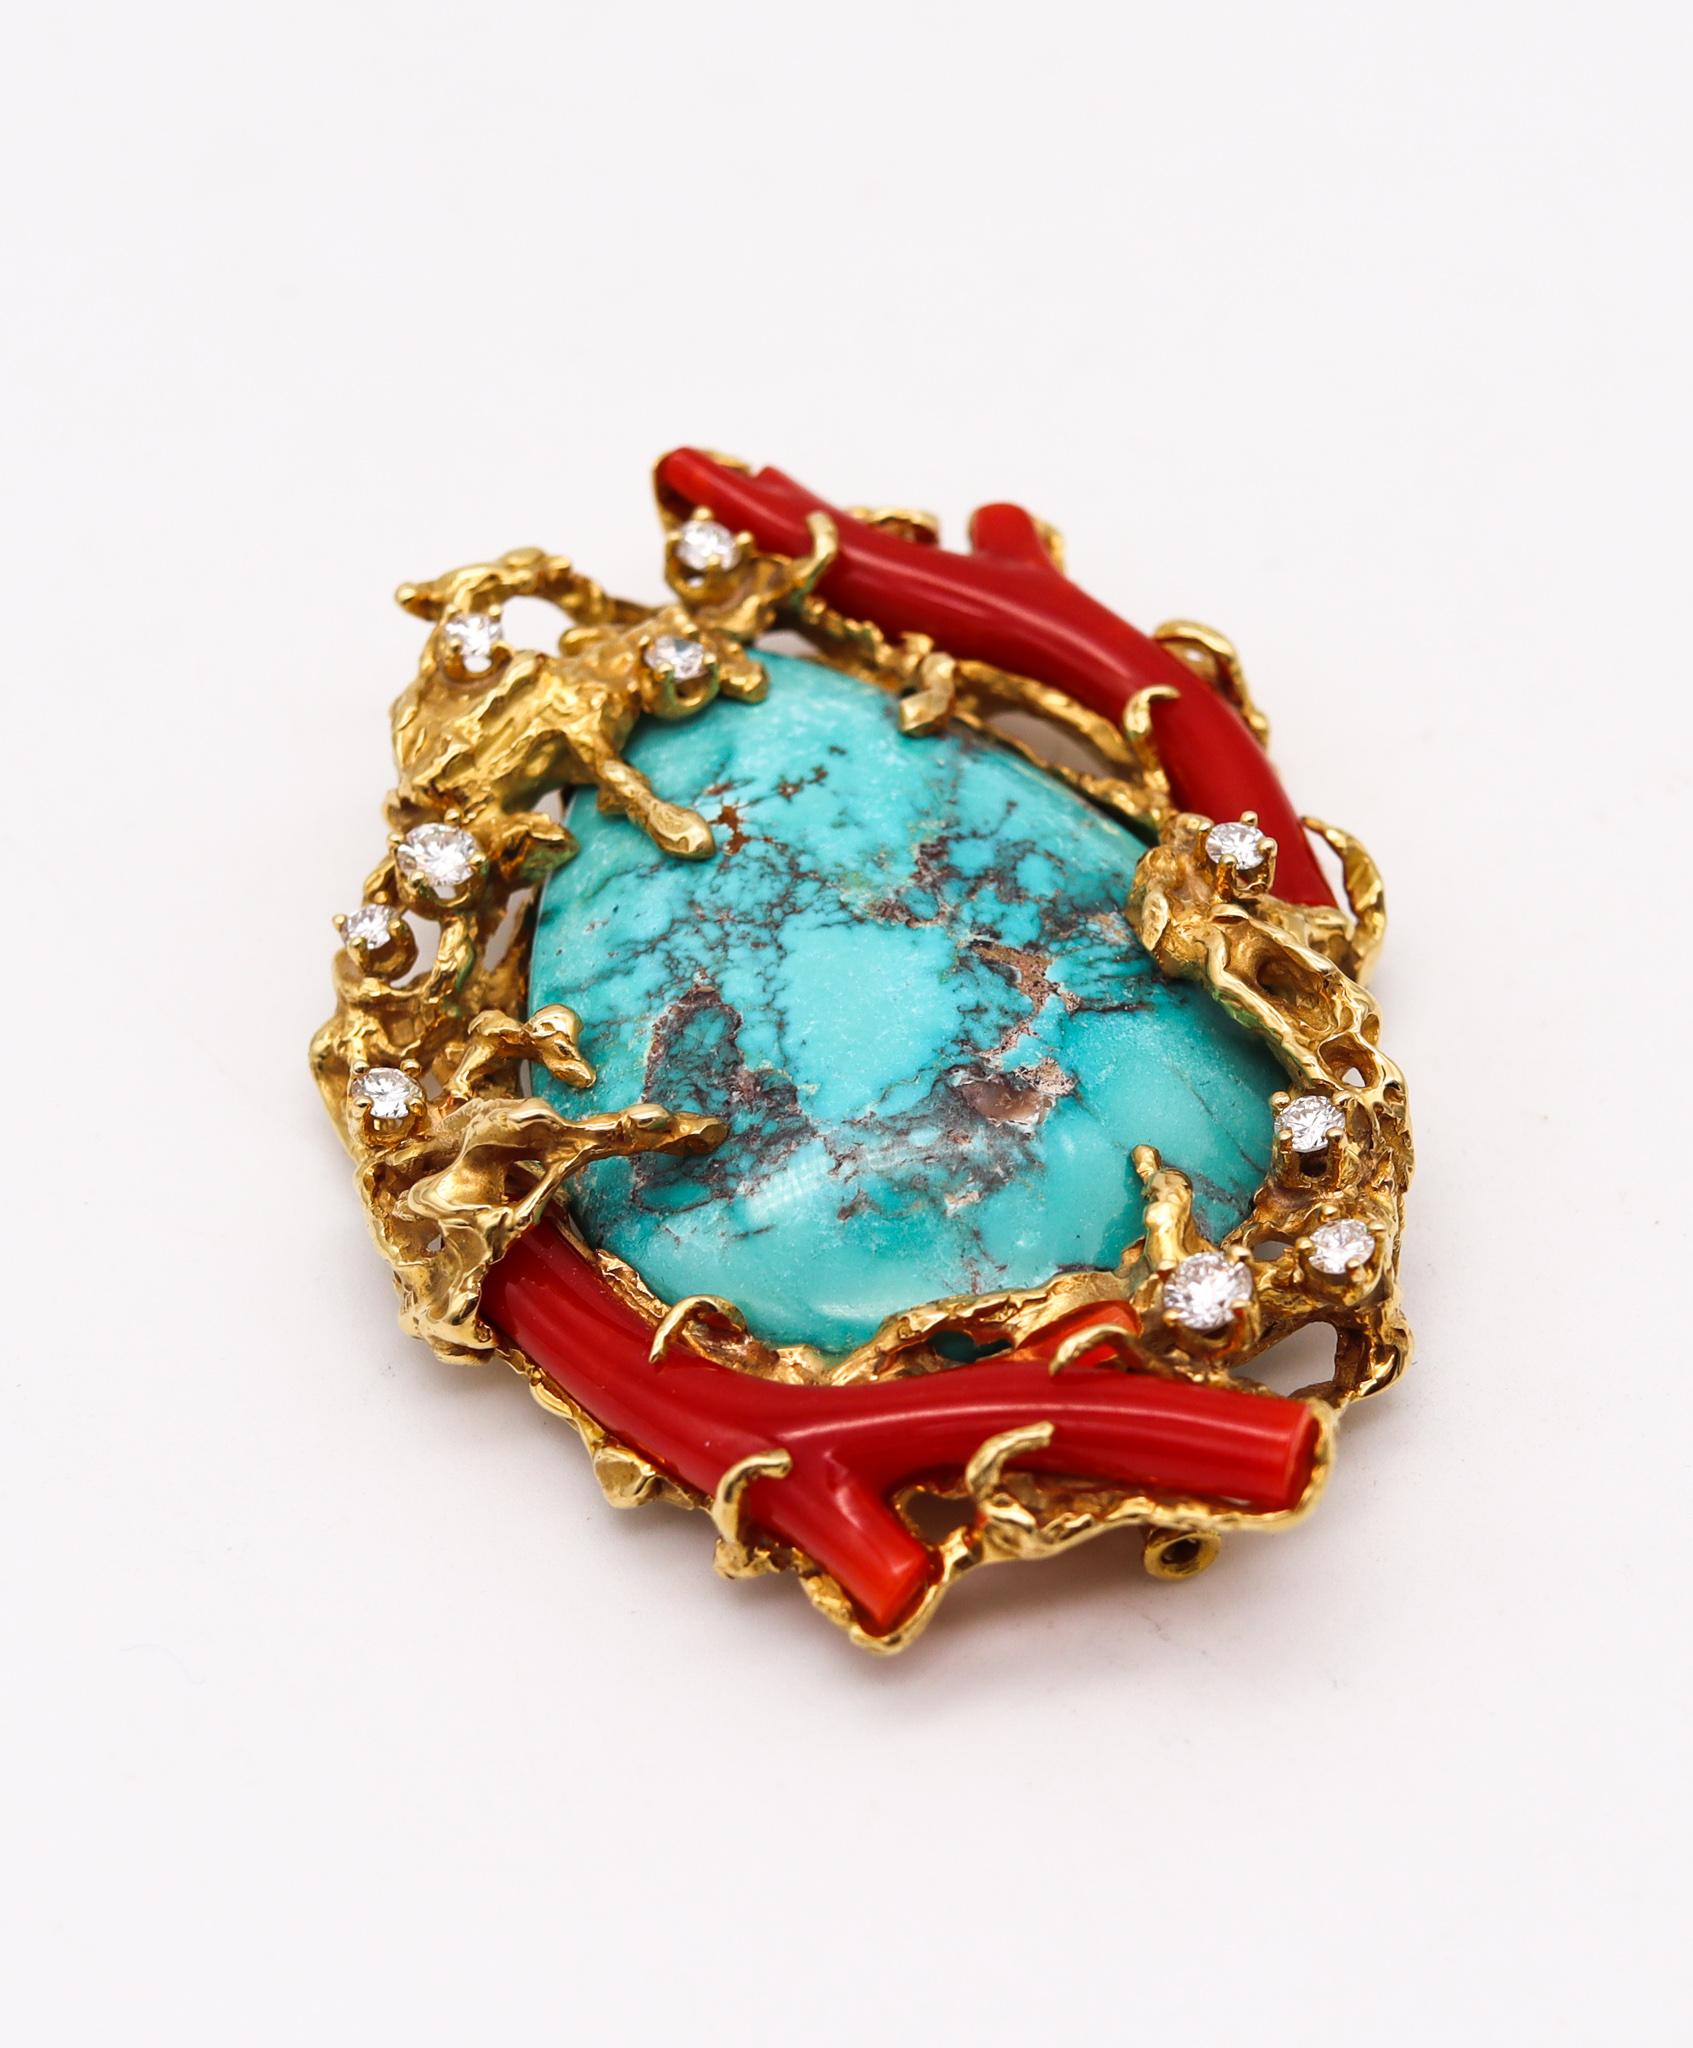 A organic modernist pendant brooch designed by Arthur King.

A magnificent sculptural piece, created by the artist goldsmith Arthur King at his atelier in New York city, back in the middle of the 1960s. This colorful pendant-brooch is very rare and